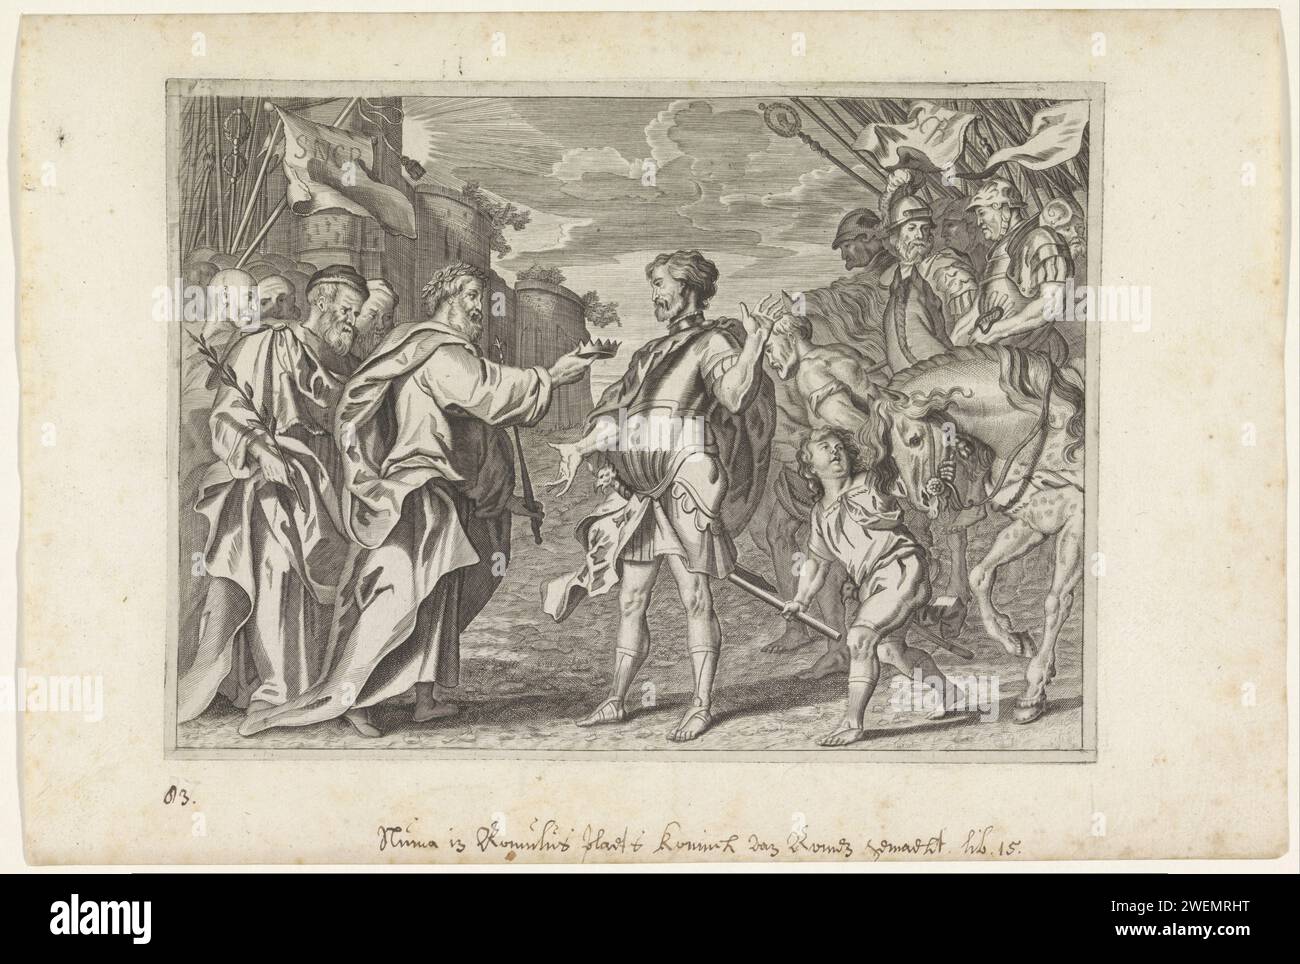 Numa Pompilius is designated as king of Rome, c. 1636 - 1670 print To Numa Pompilius, the crown is handed over after the disappearance of Romulus, the founder of Rome. Latin and Sabines on either side.  paper engraving (story of) Numa Pompilius - non-aggressive activities of person from classical history. coronation of a ruler Stock Photo